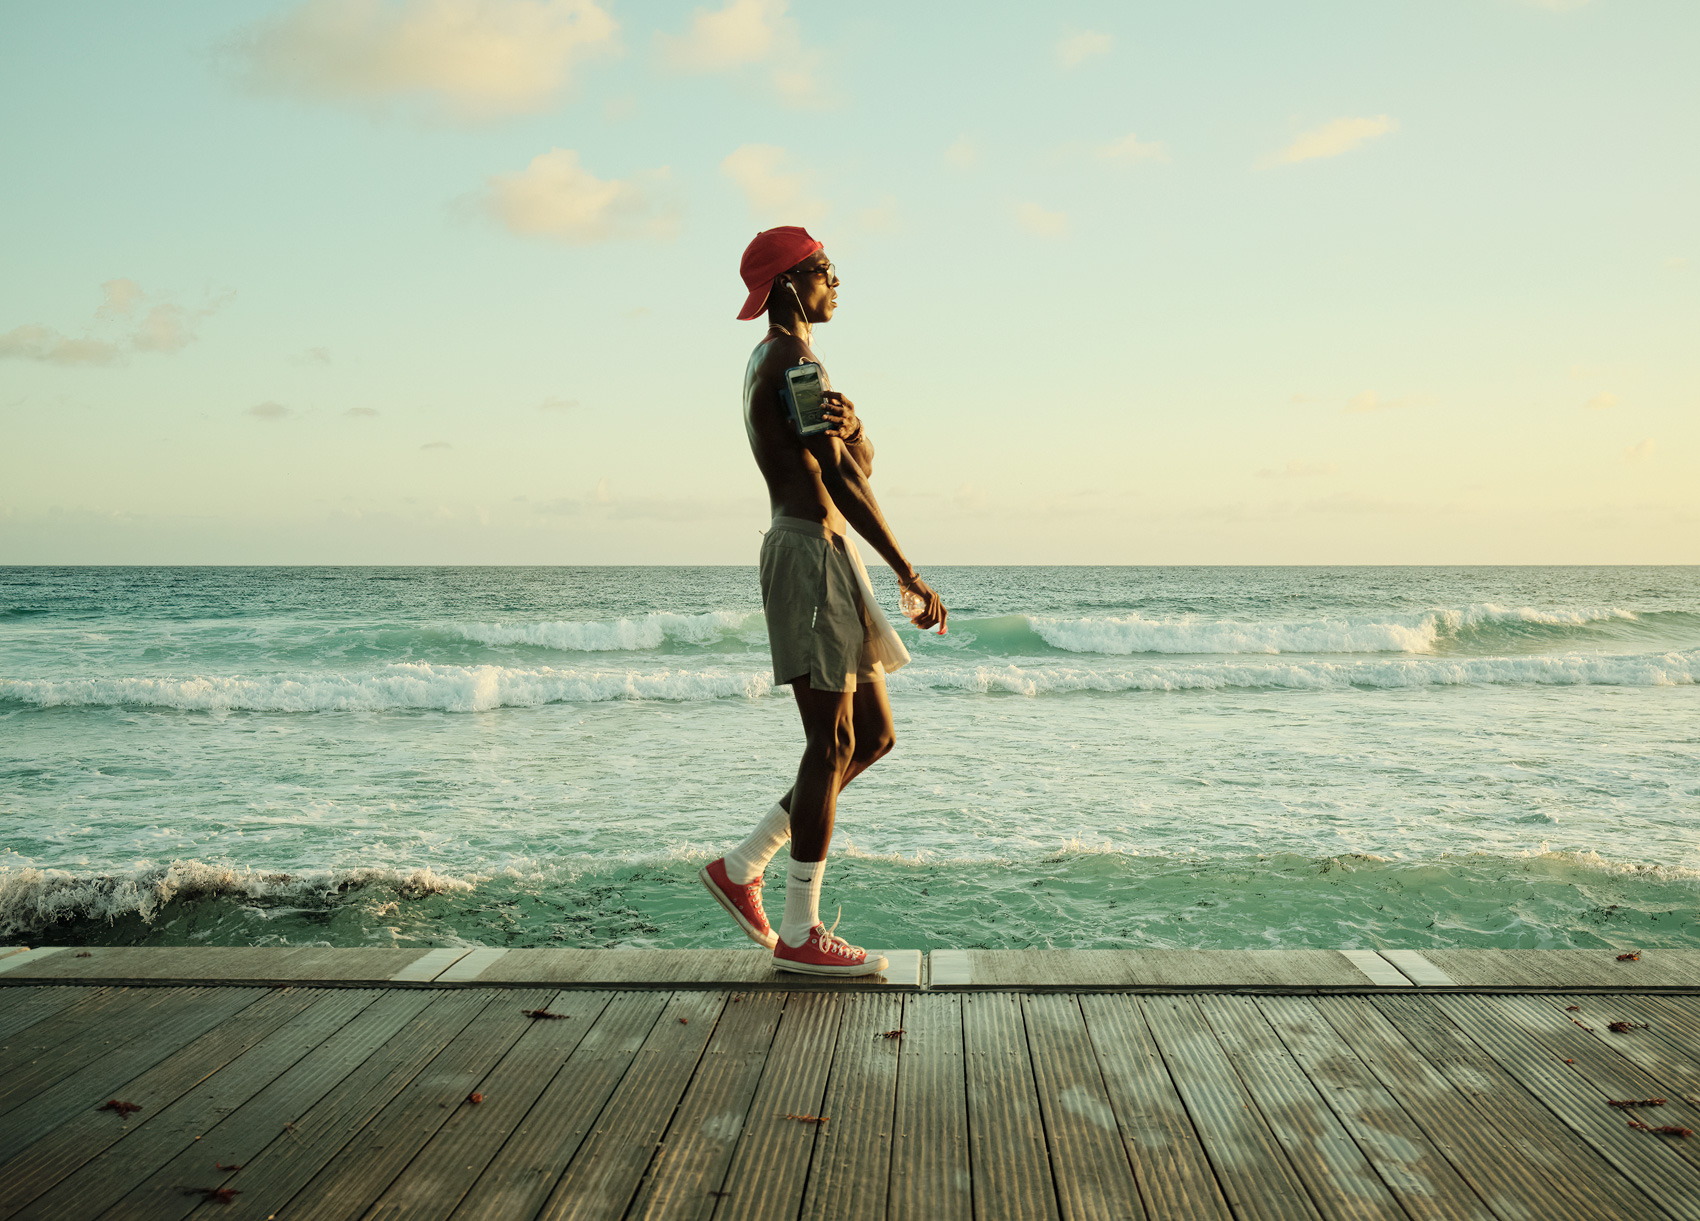 A RUNNER IN BARBADOS